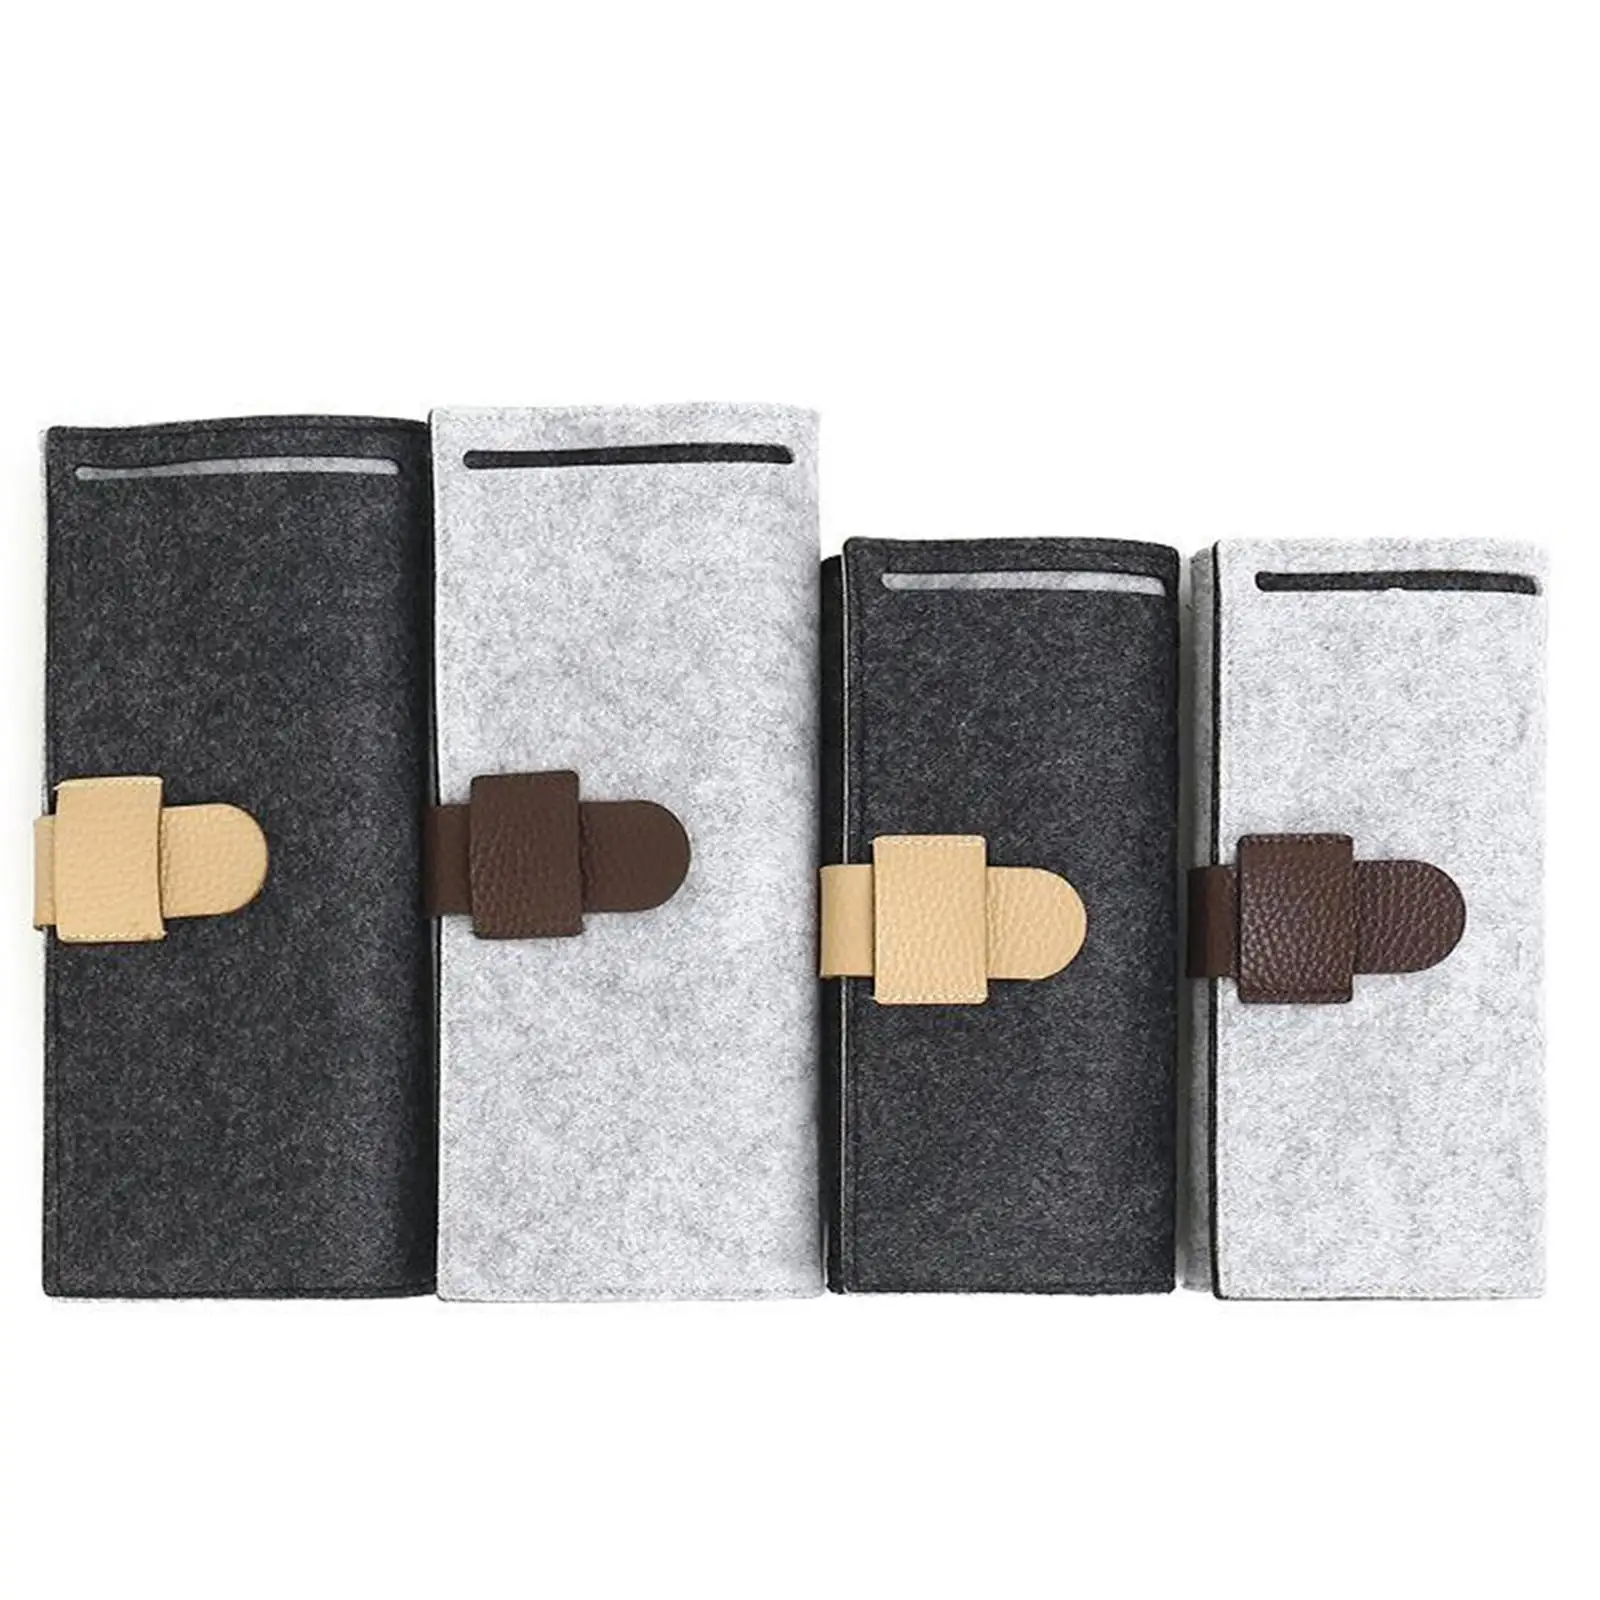 Foldable Secure Roll Jewelry Storage Bag Compact for Travel Multiple Rings